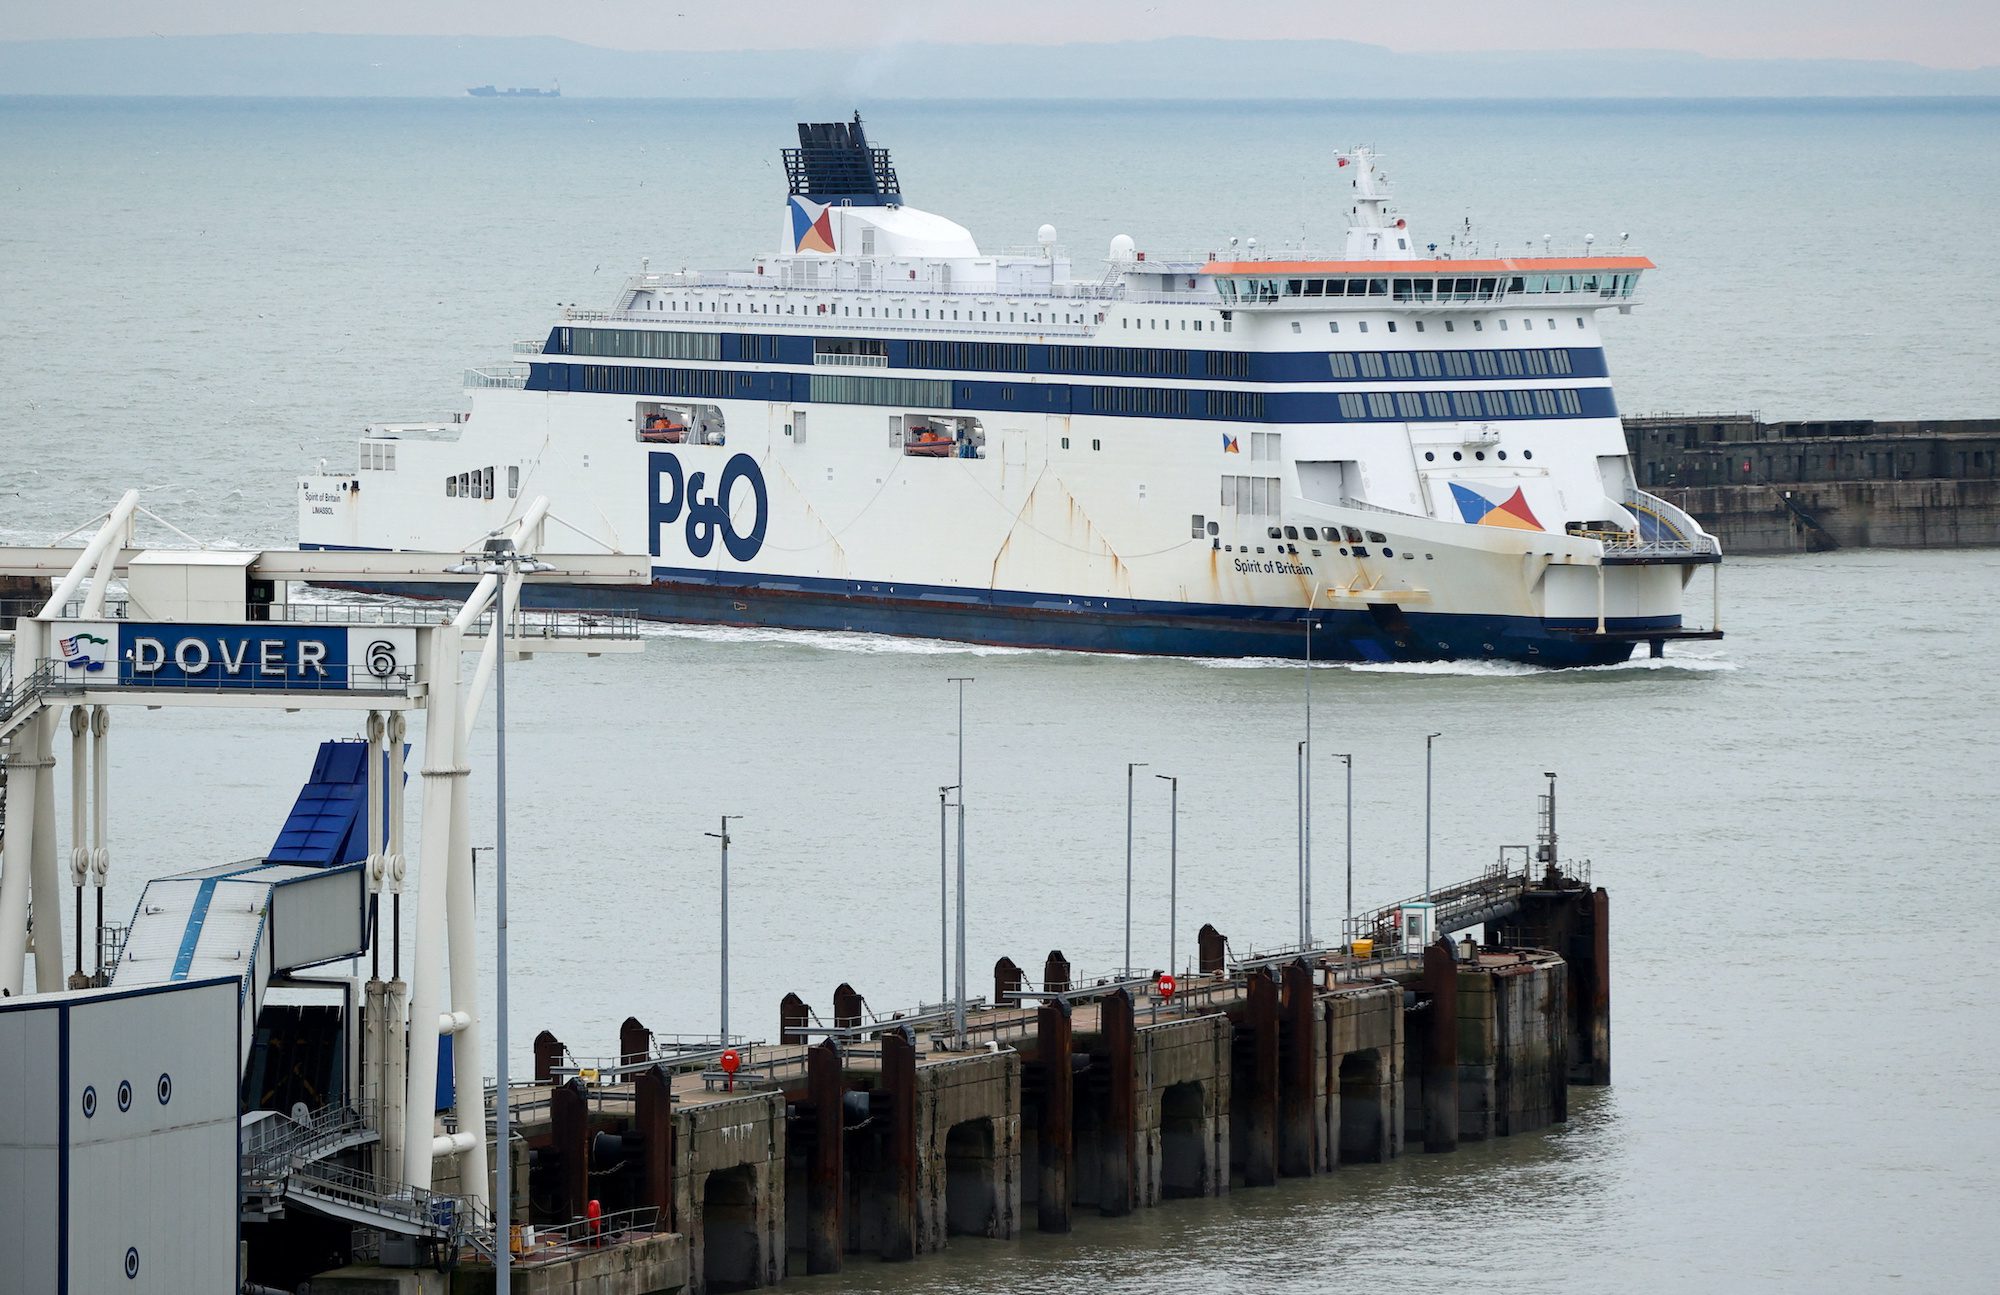 British Prime Minister Johnson Says P&O Ferries Broke Labor Laws With Mass Firings